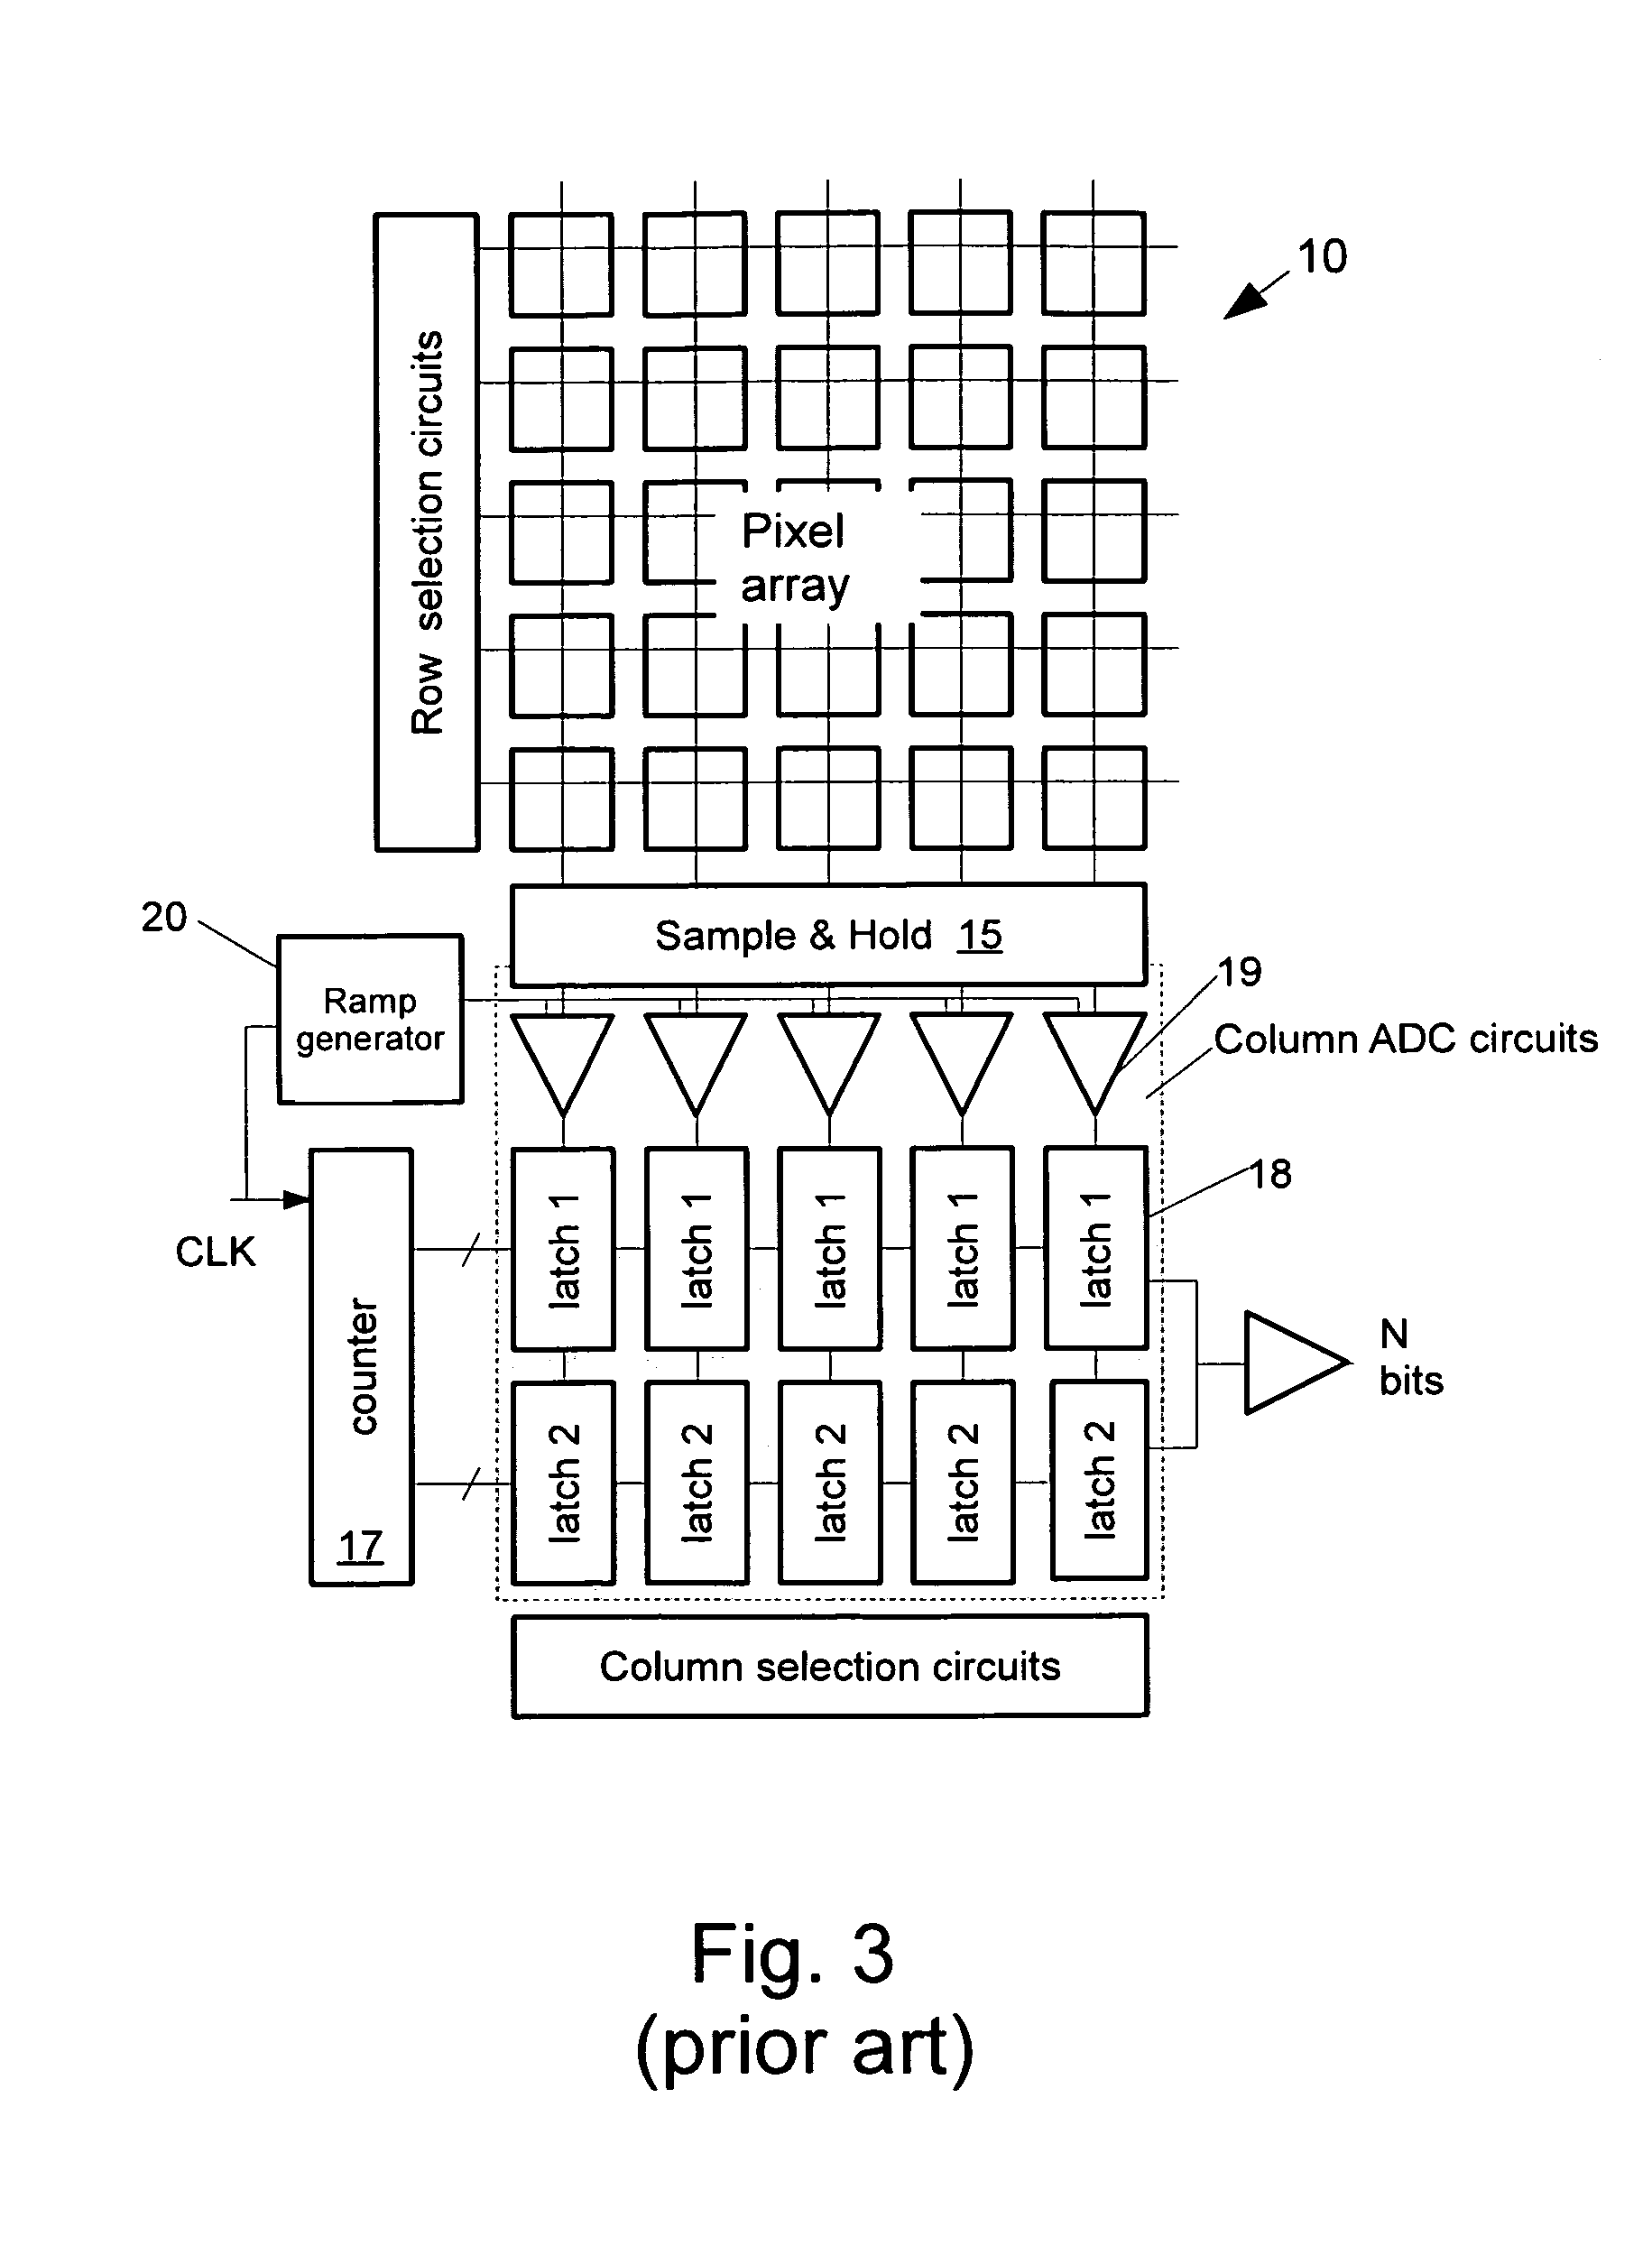 Analog-to-digital conversion in pixel arrays